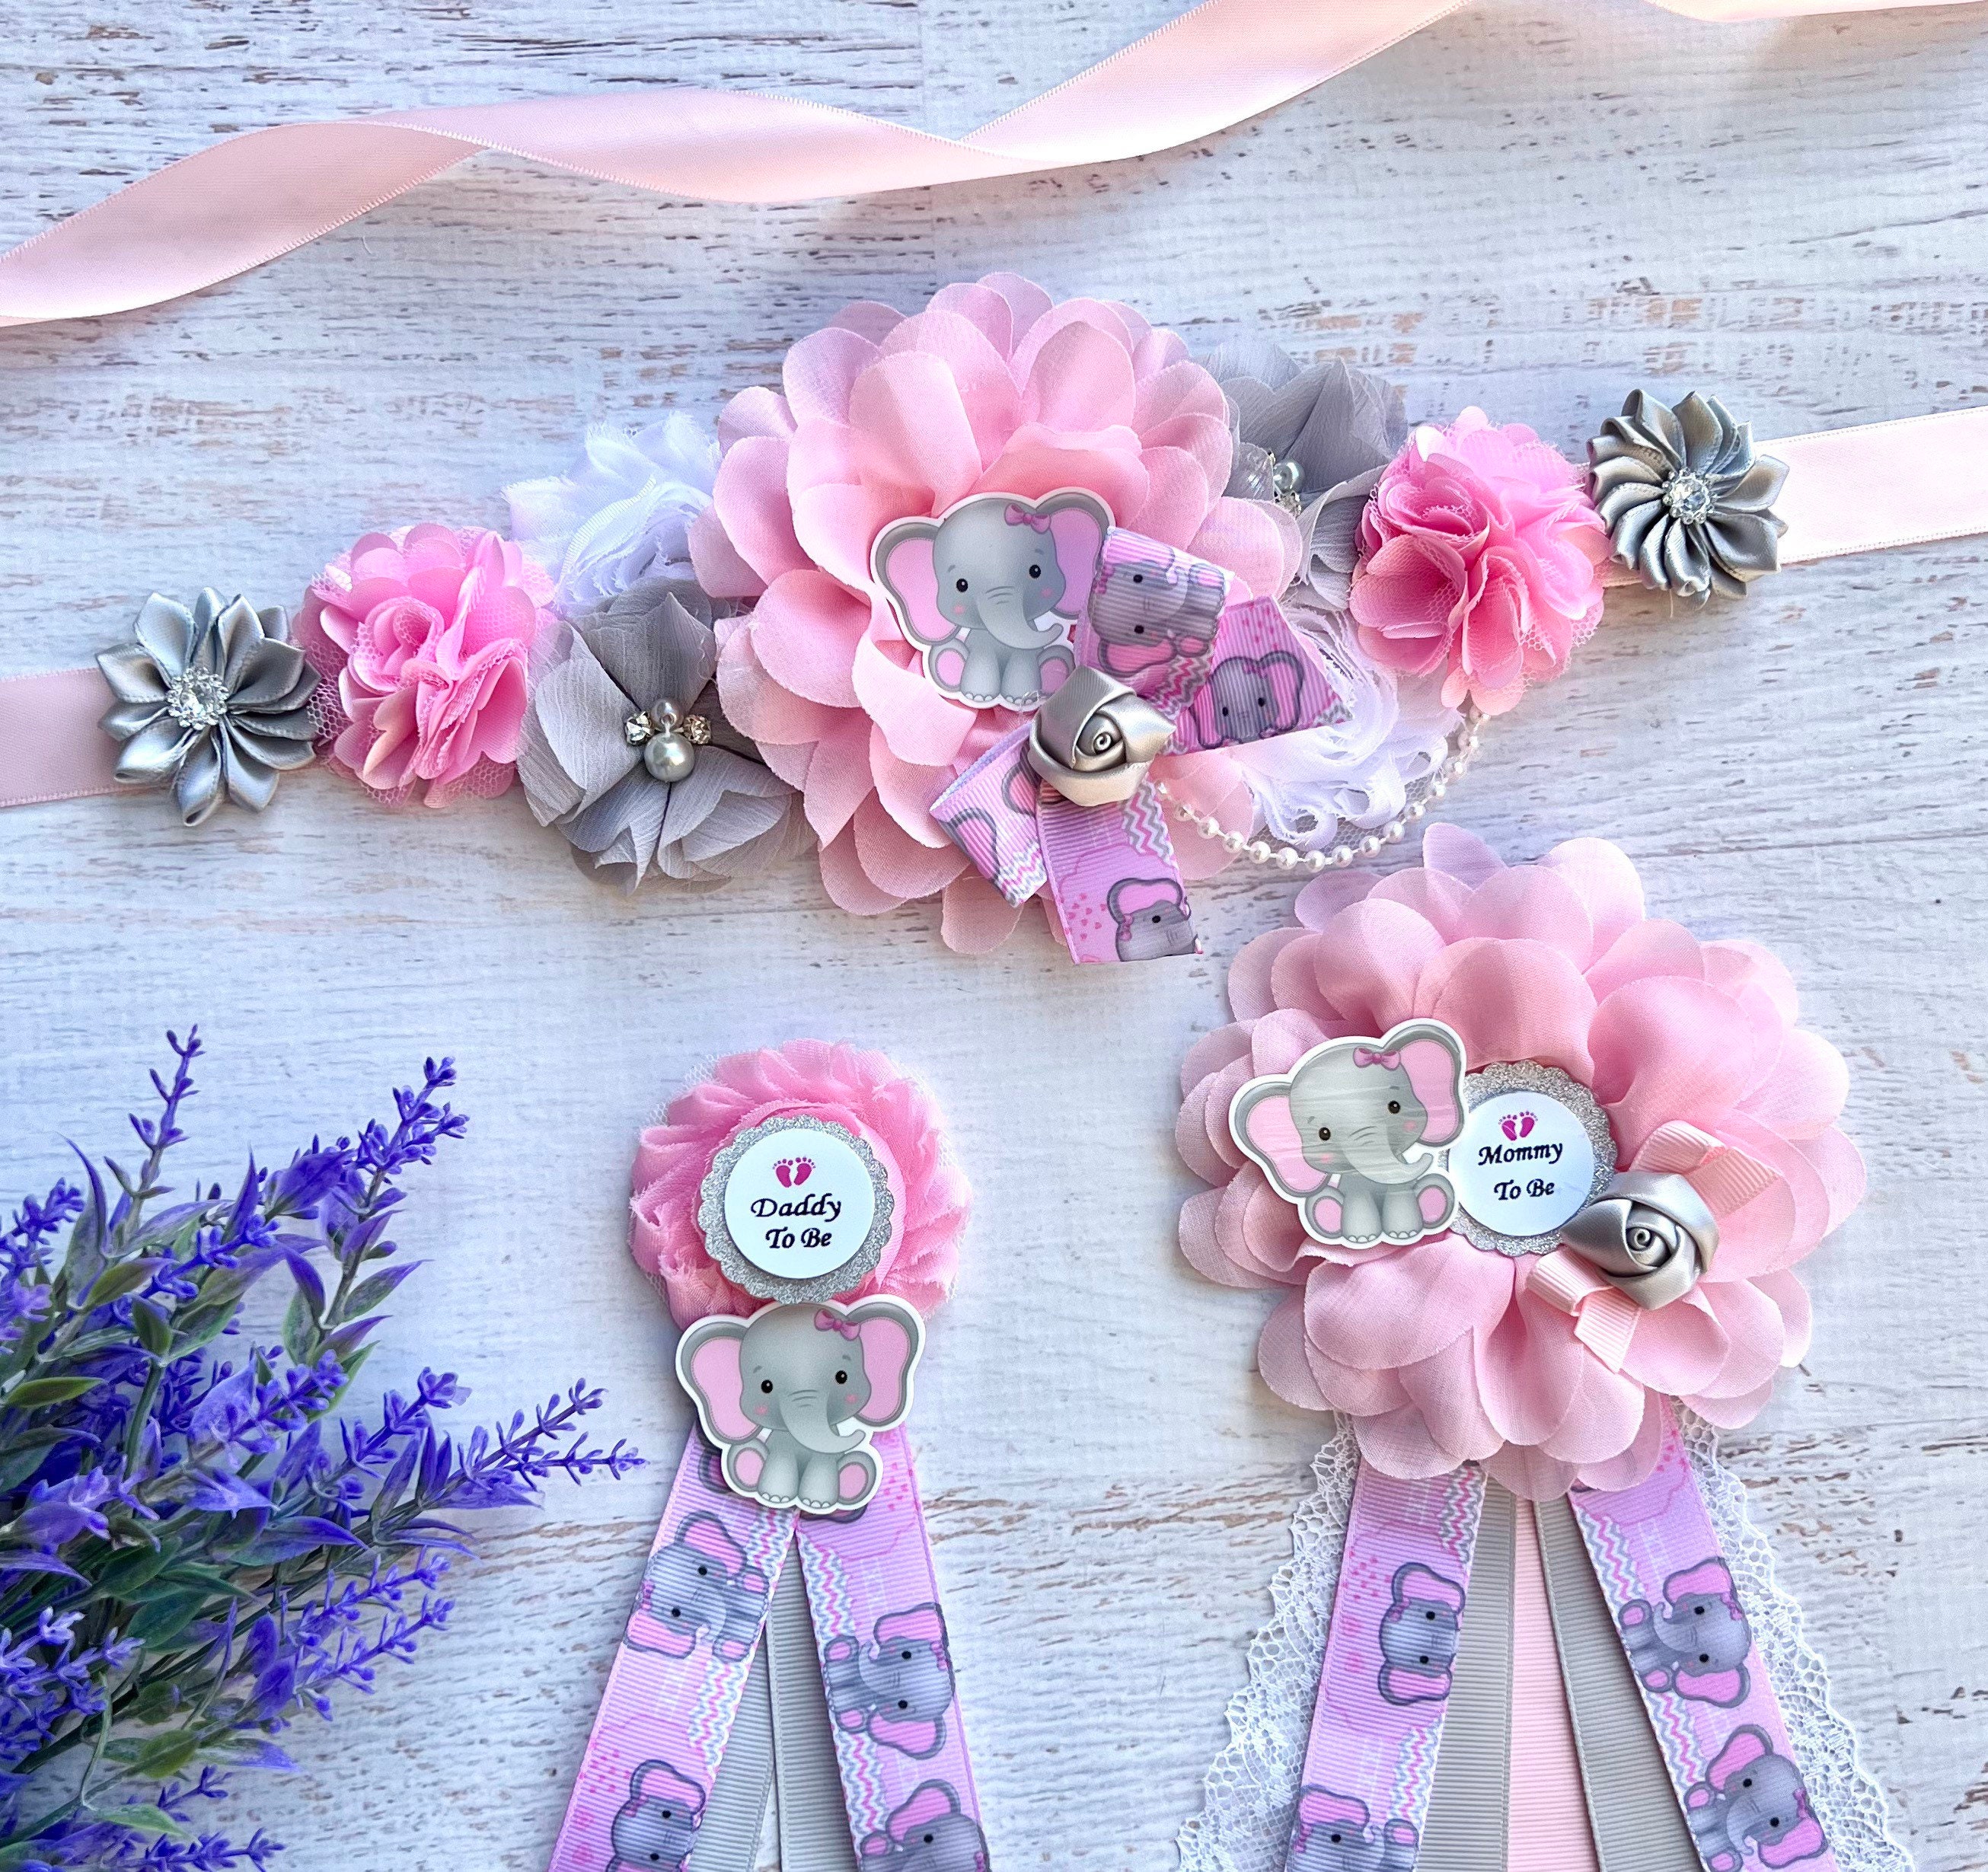 Pin by Kari Borgra on Baby Shower  Baby shower themes, Elephant baby  shower decorations, Baby shower decorations